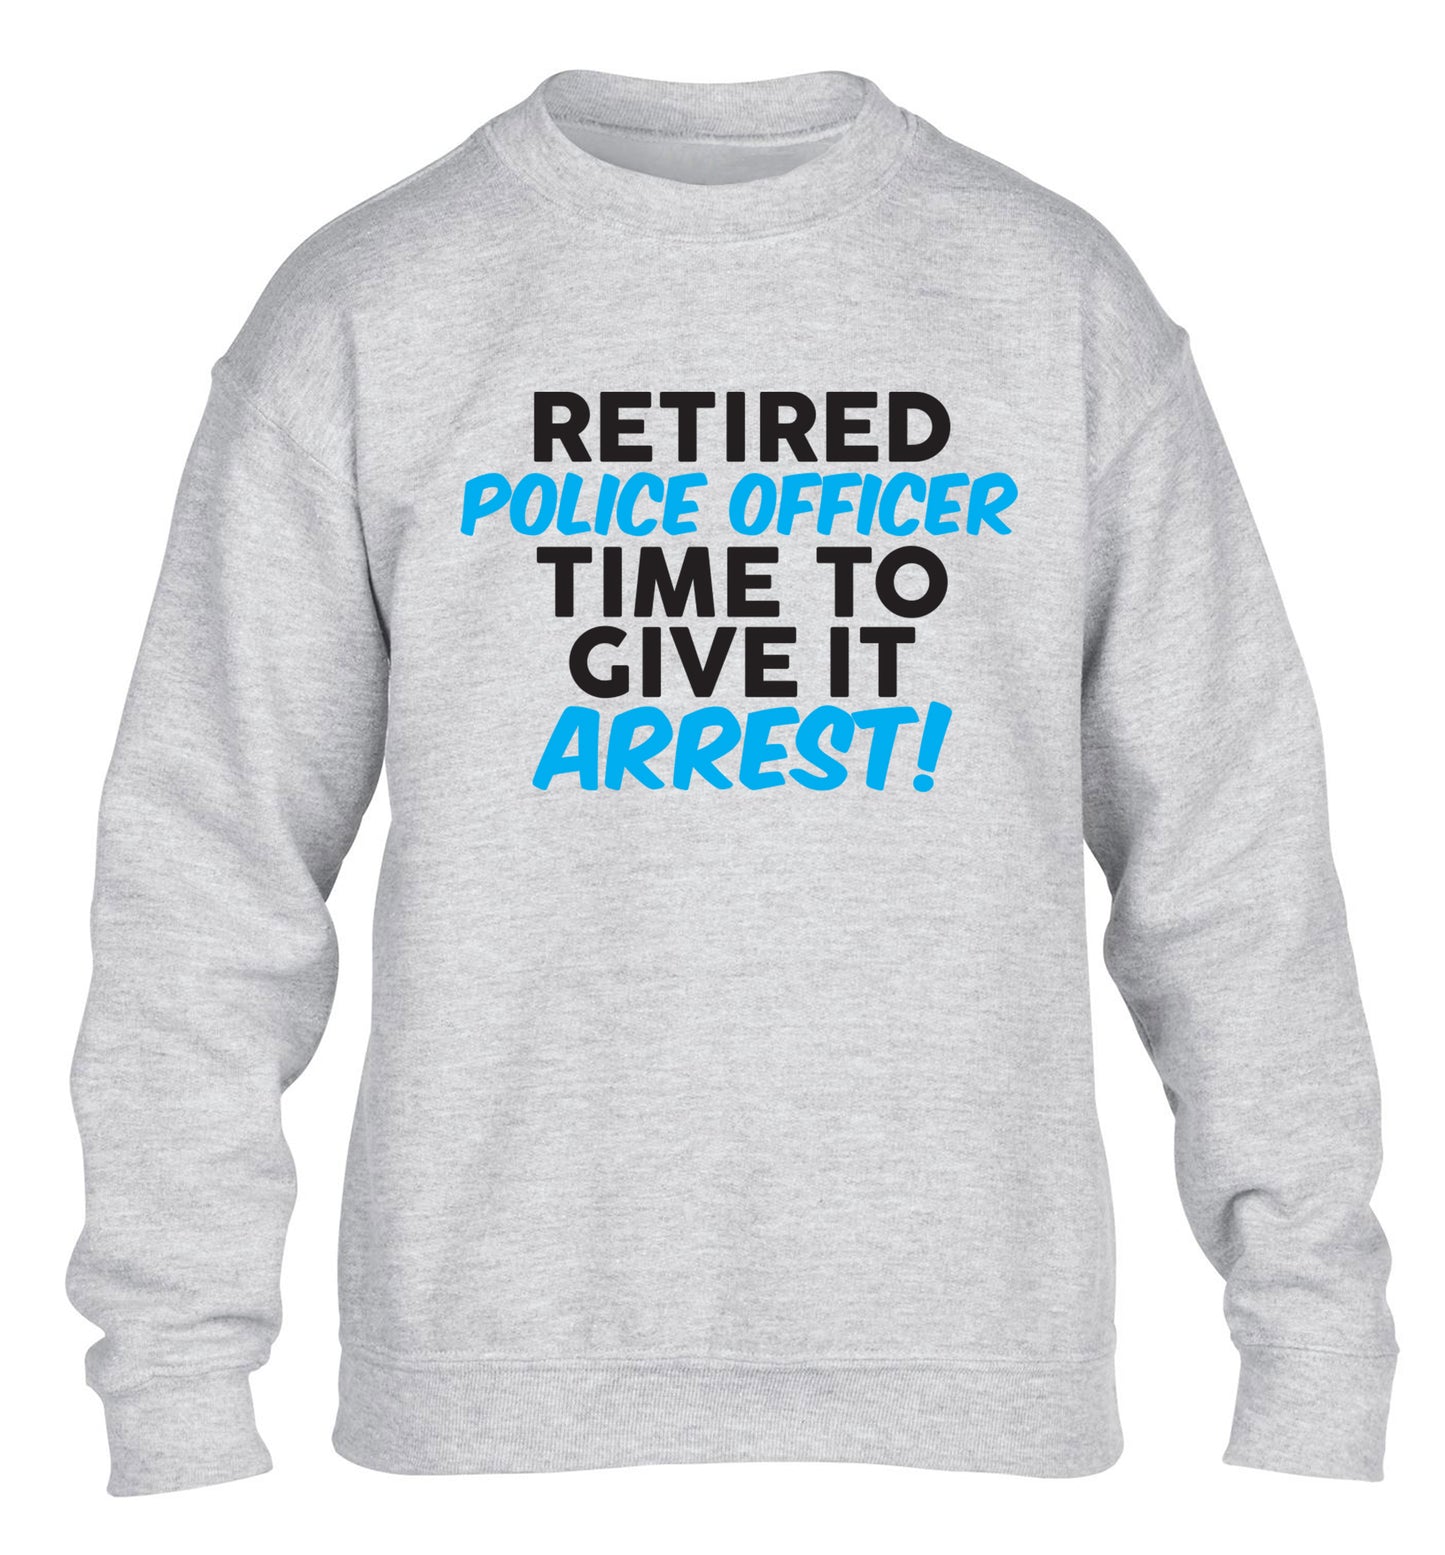 Retired police officer time to give it arrest children's grey sweater 12-13 Years